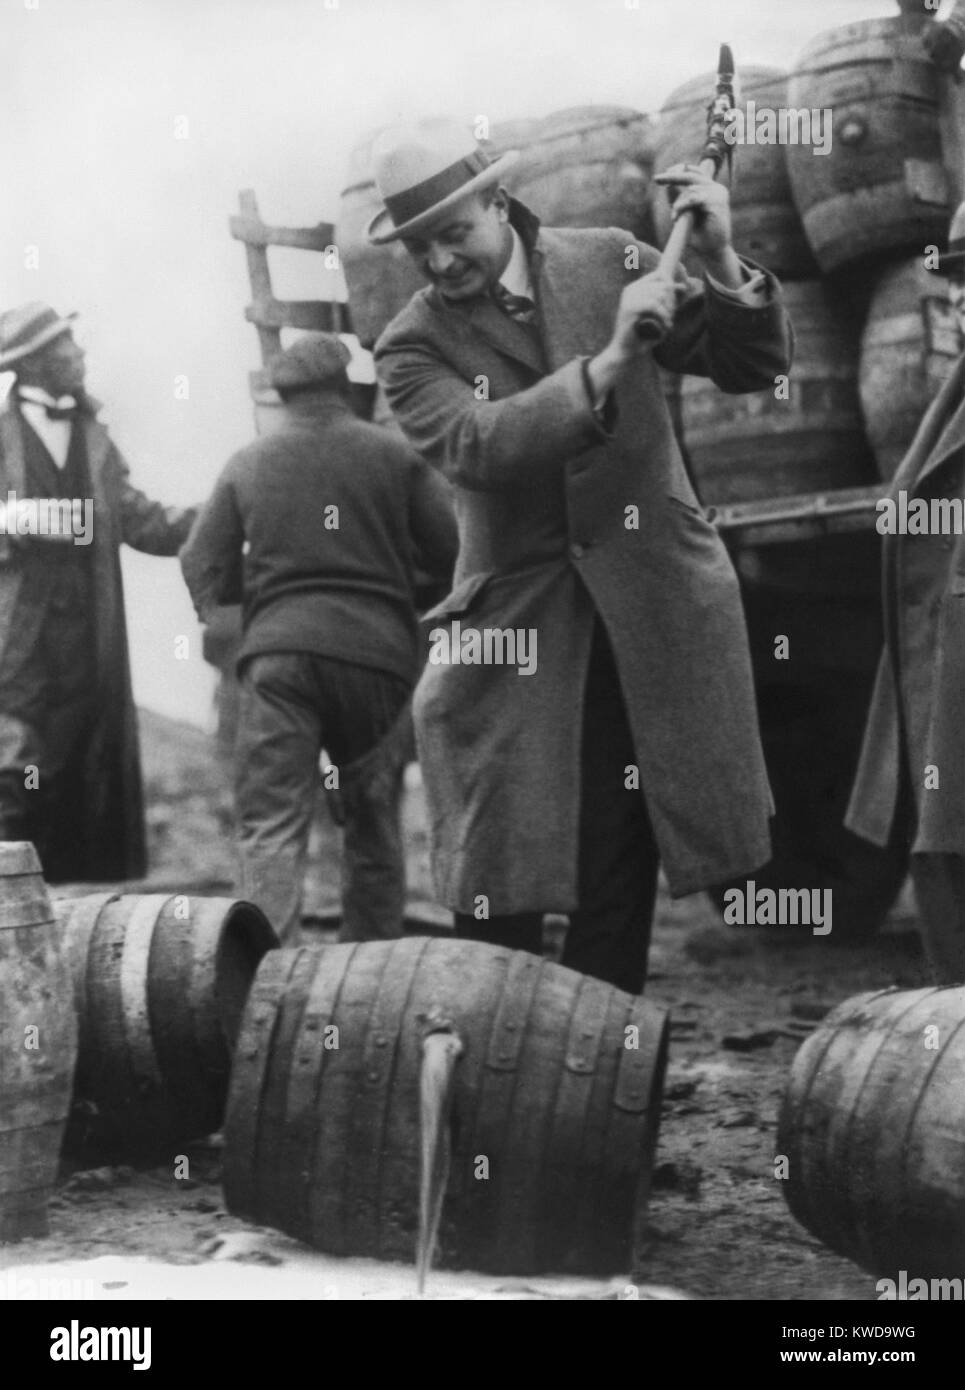 Beer flows into the Schuylkill River in Philadelphia, as beer kegs are destroyed by an ax, 1924. Wielding the Prohibition ax is Public Safety Director, former WW1 Marine General, Smedley D. 'Duckboards' Butler (BSLOC 2016 10 85) Stock Photo